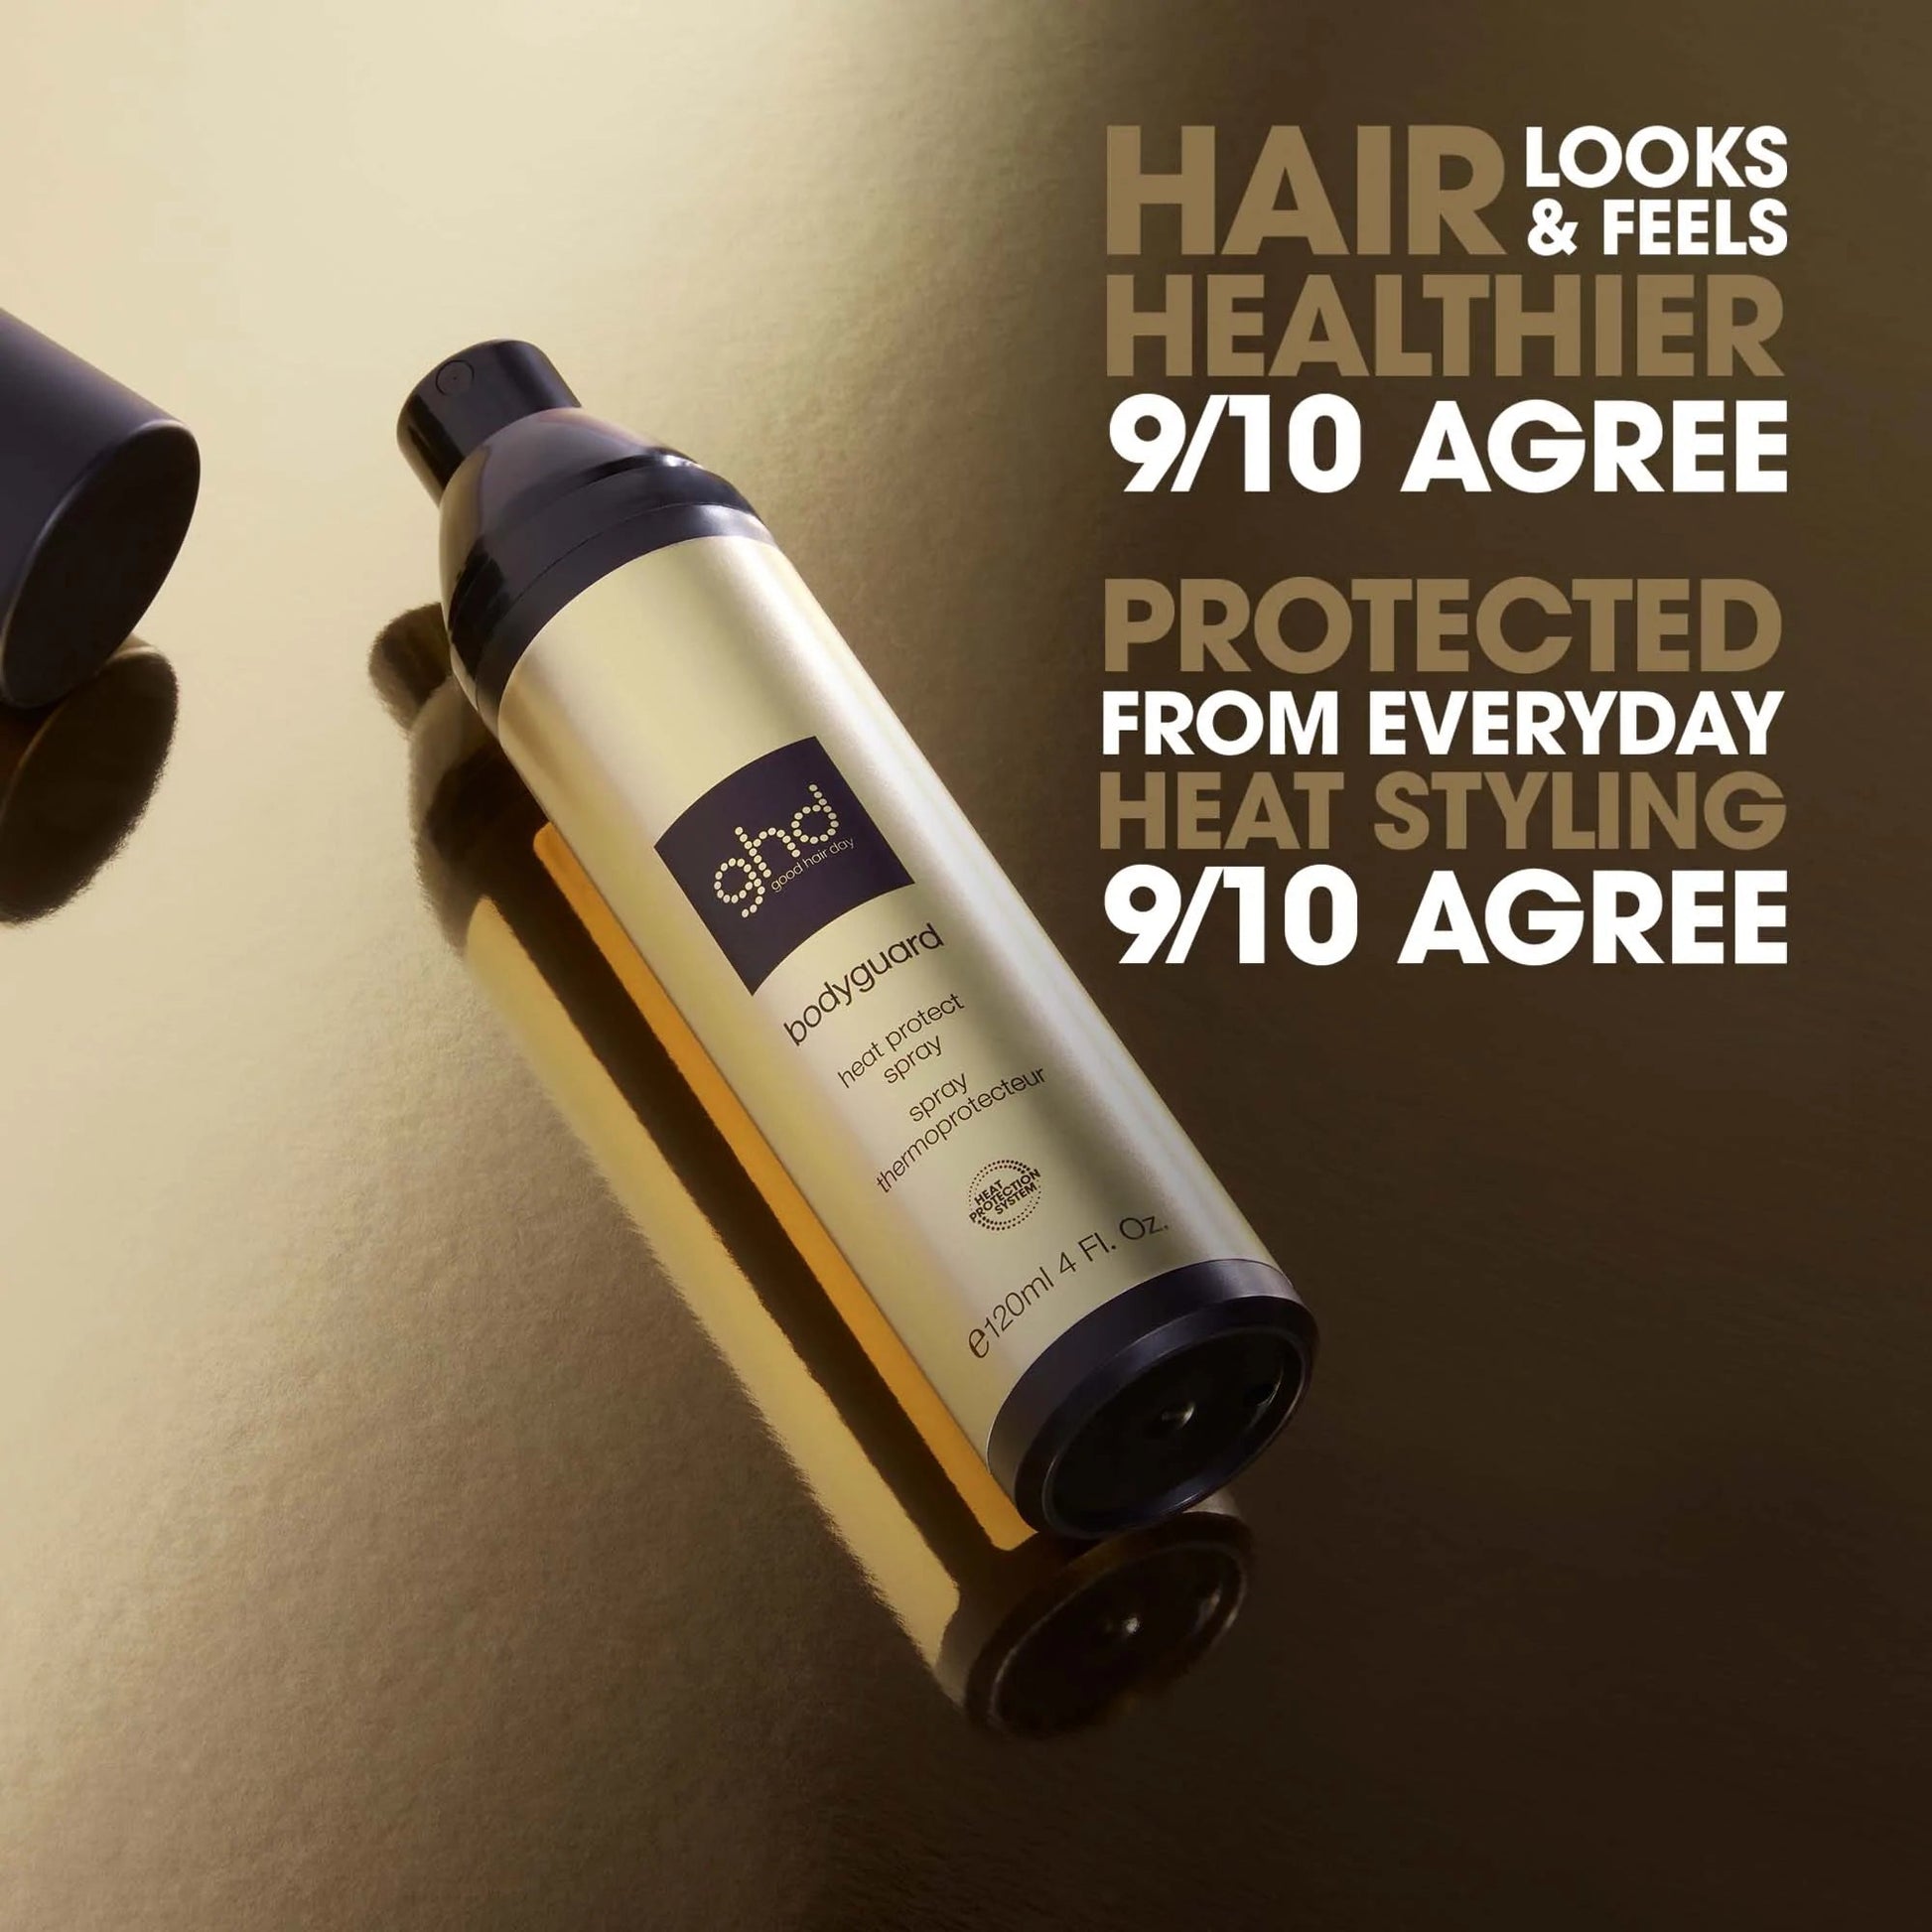 GHD Bodyguard - Heat Protect Spray - shelley and co